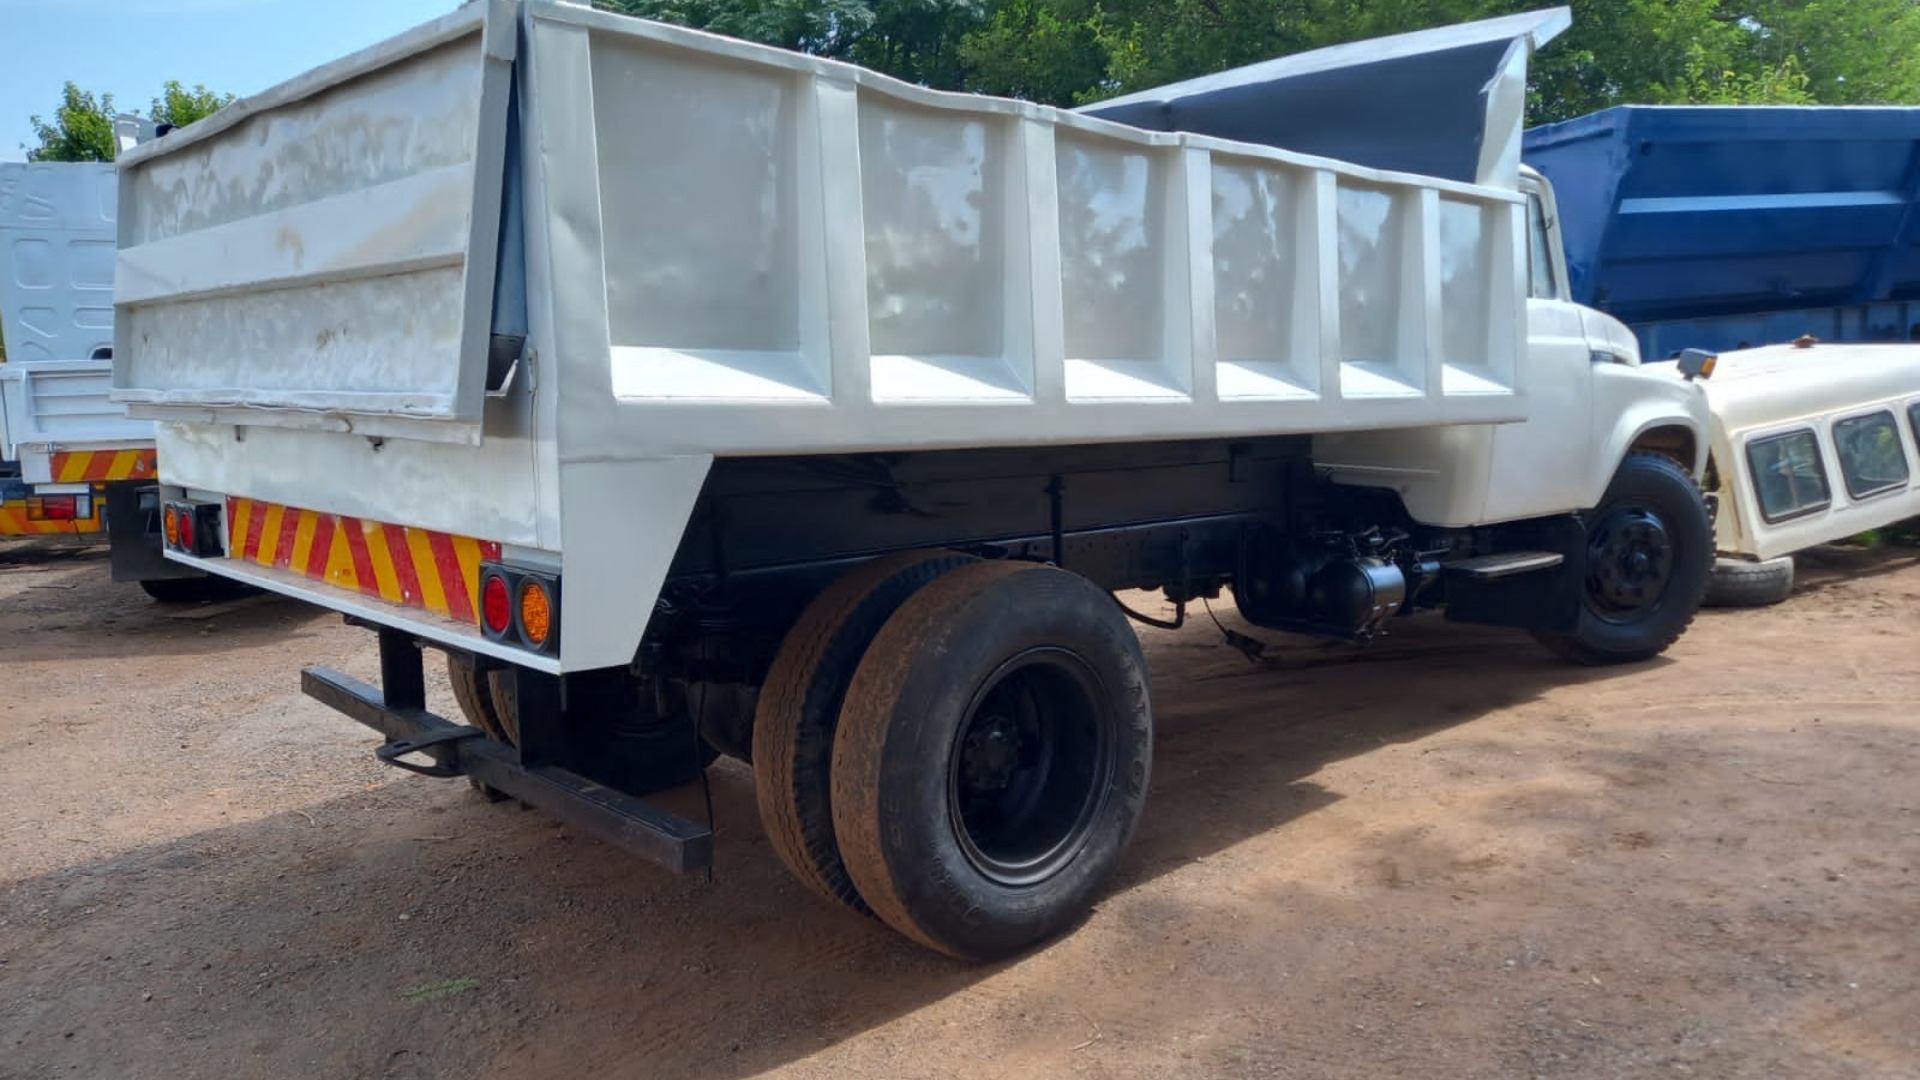 Nissan NISSAN LONG NOSE TIPPER 6M3 GOOD CONDITION Tipper trucks for sale in  Gauteng | R 180,000 on Agrimag